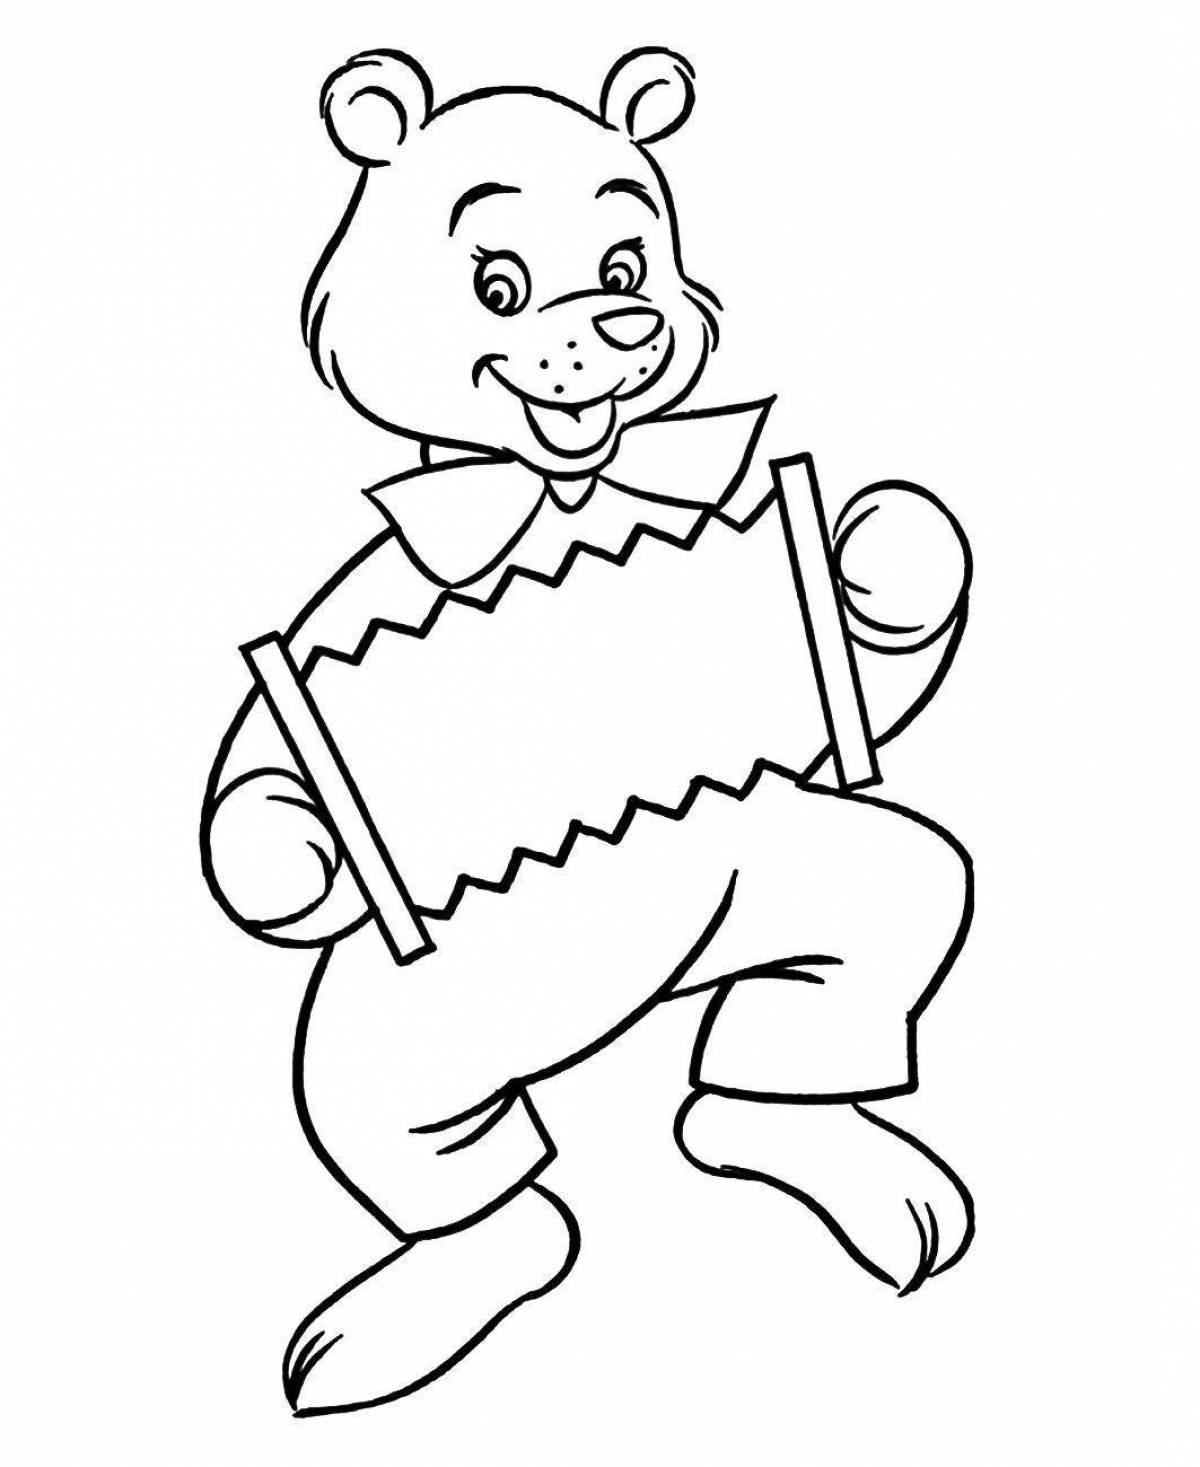 Page of the funny bear game